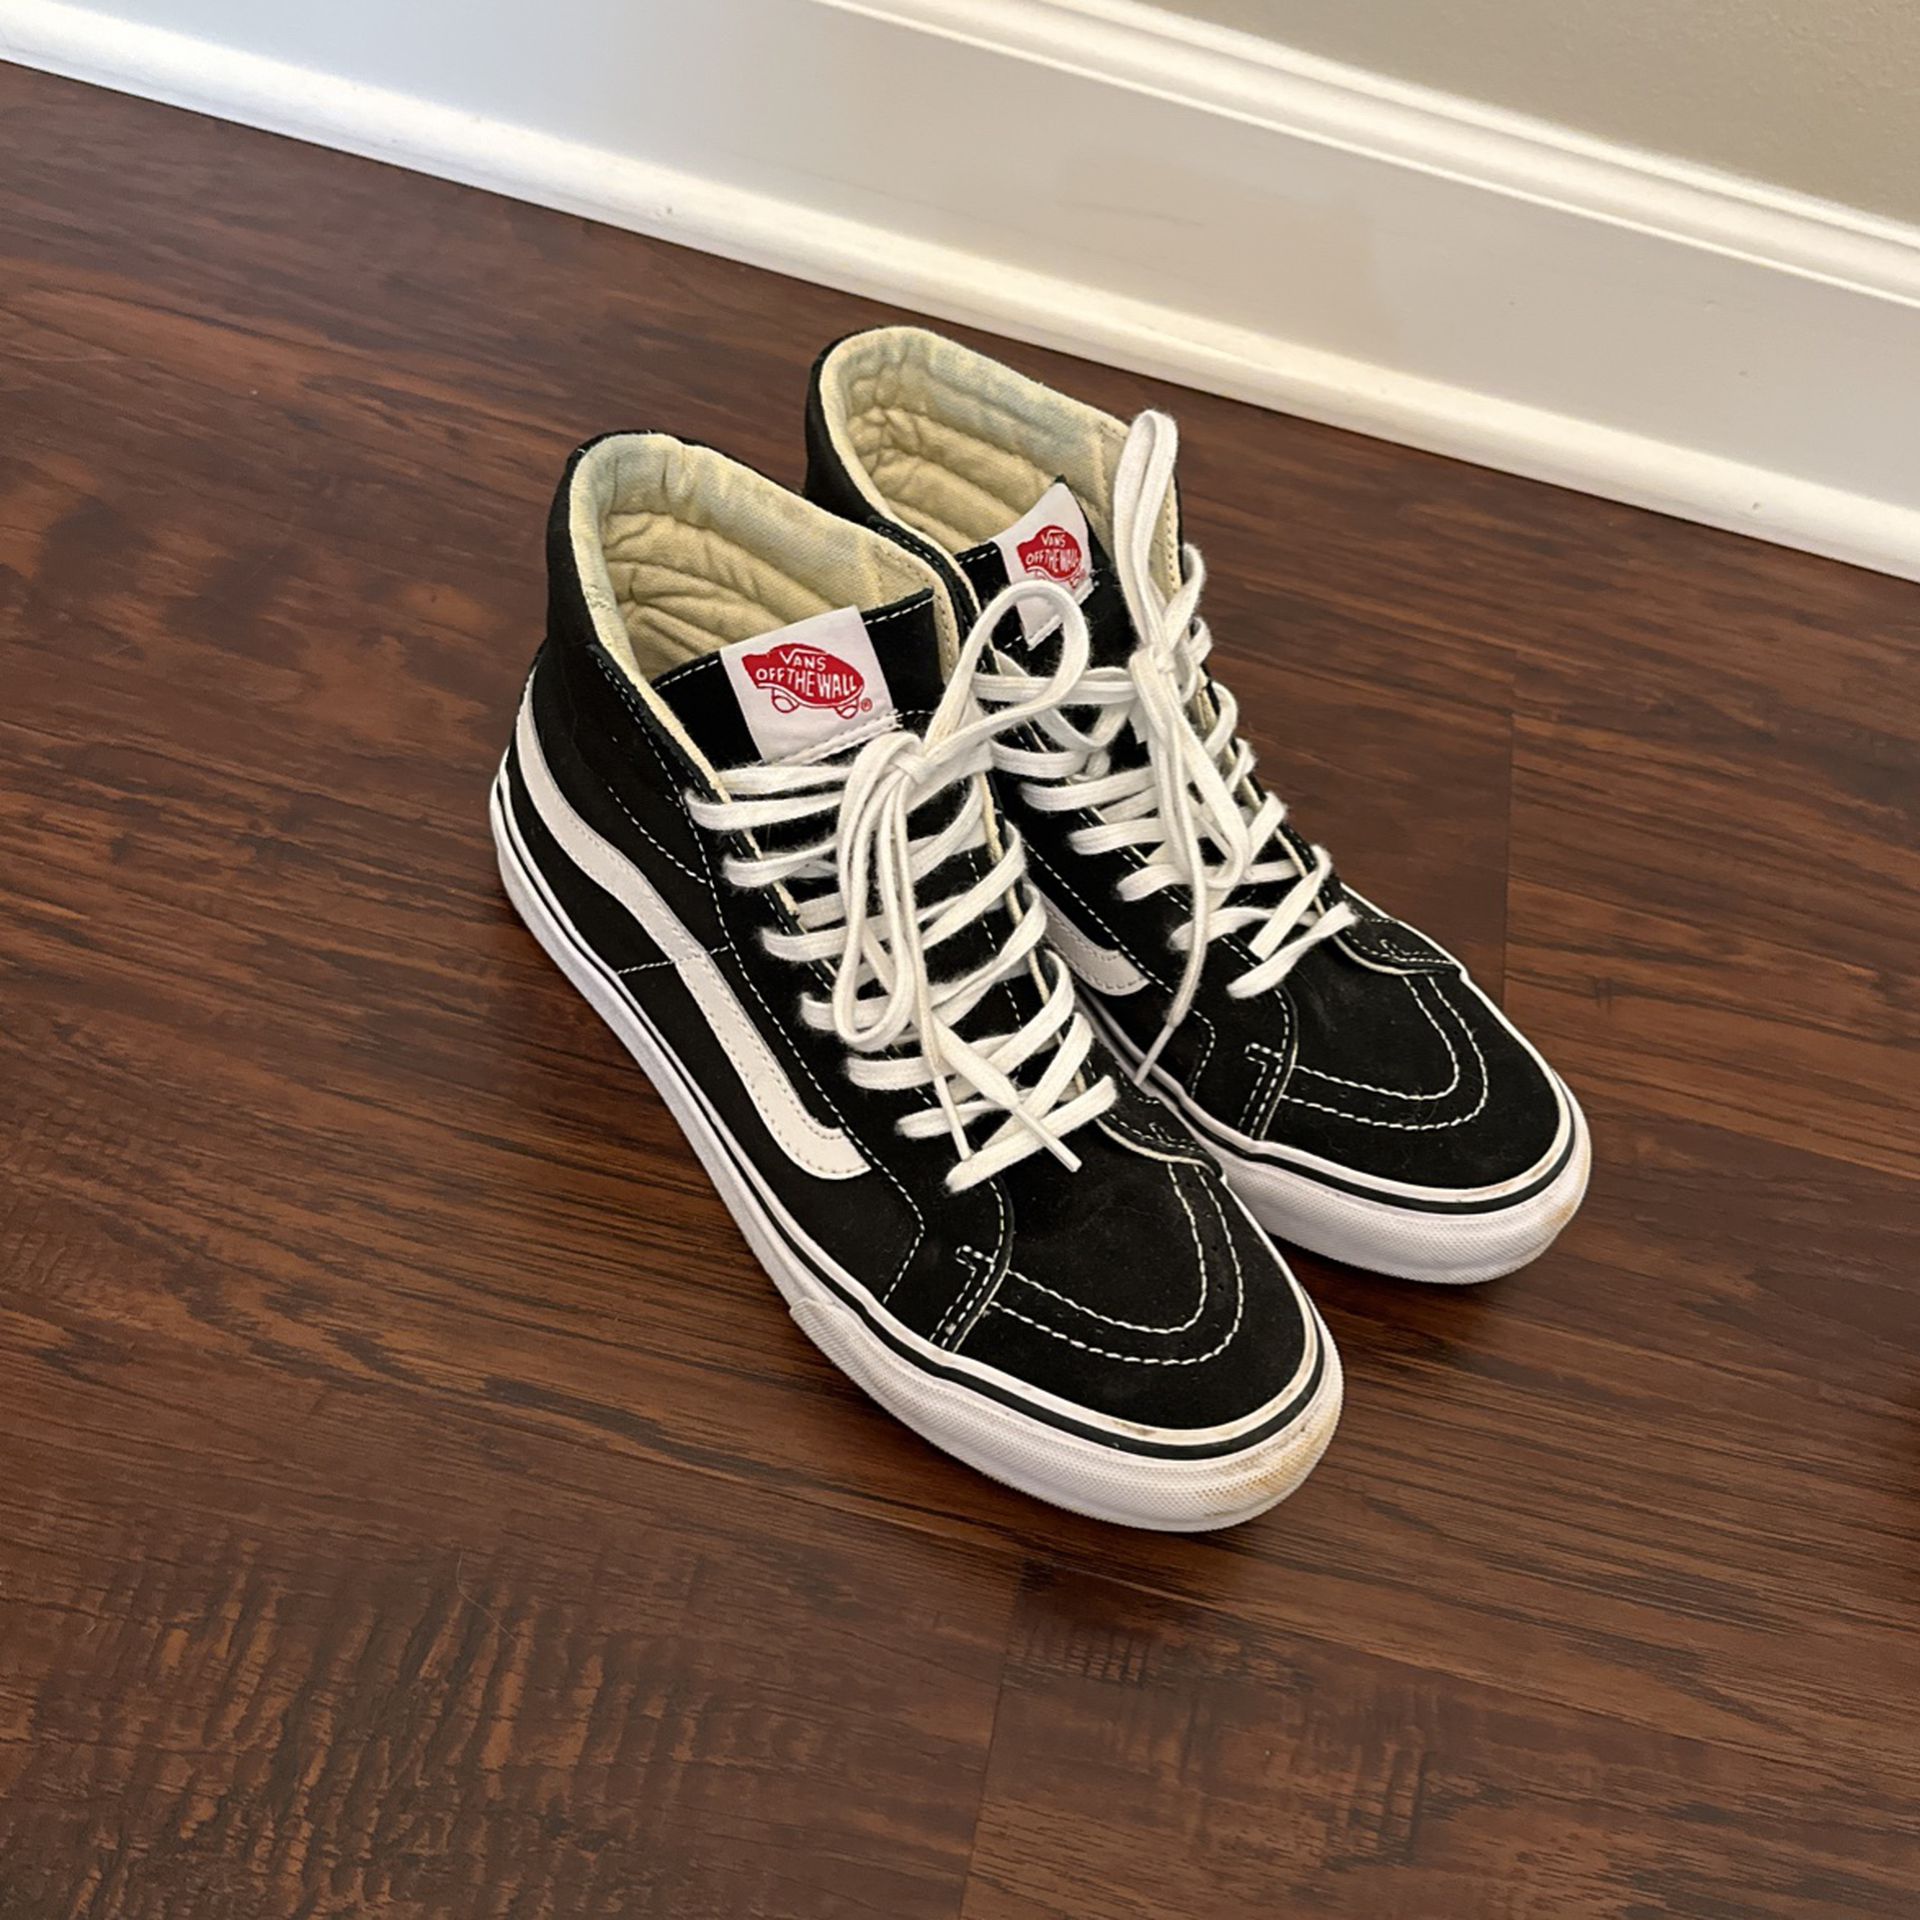 Very Gently Used Vans High tops - Woman’s Size 9